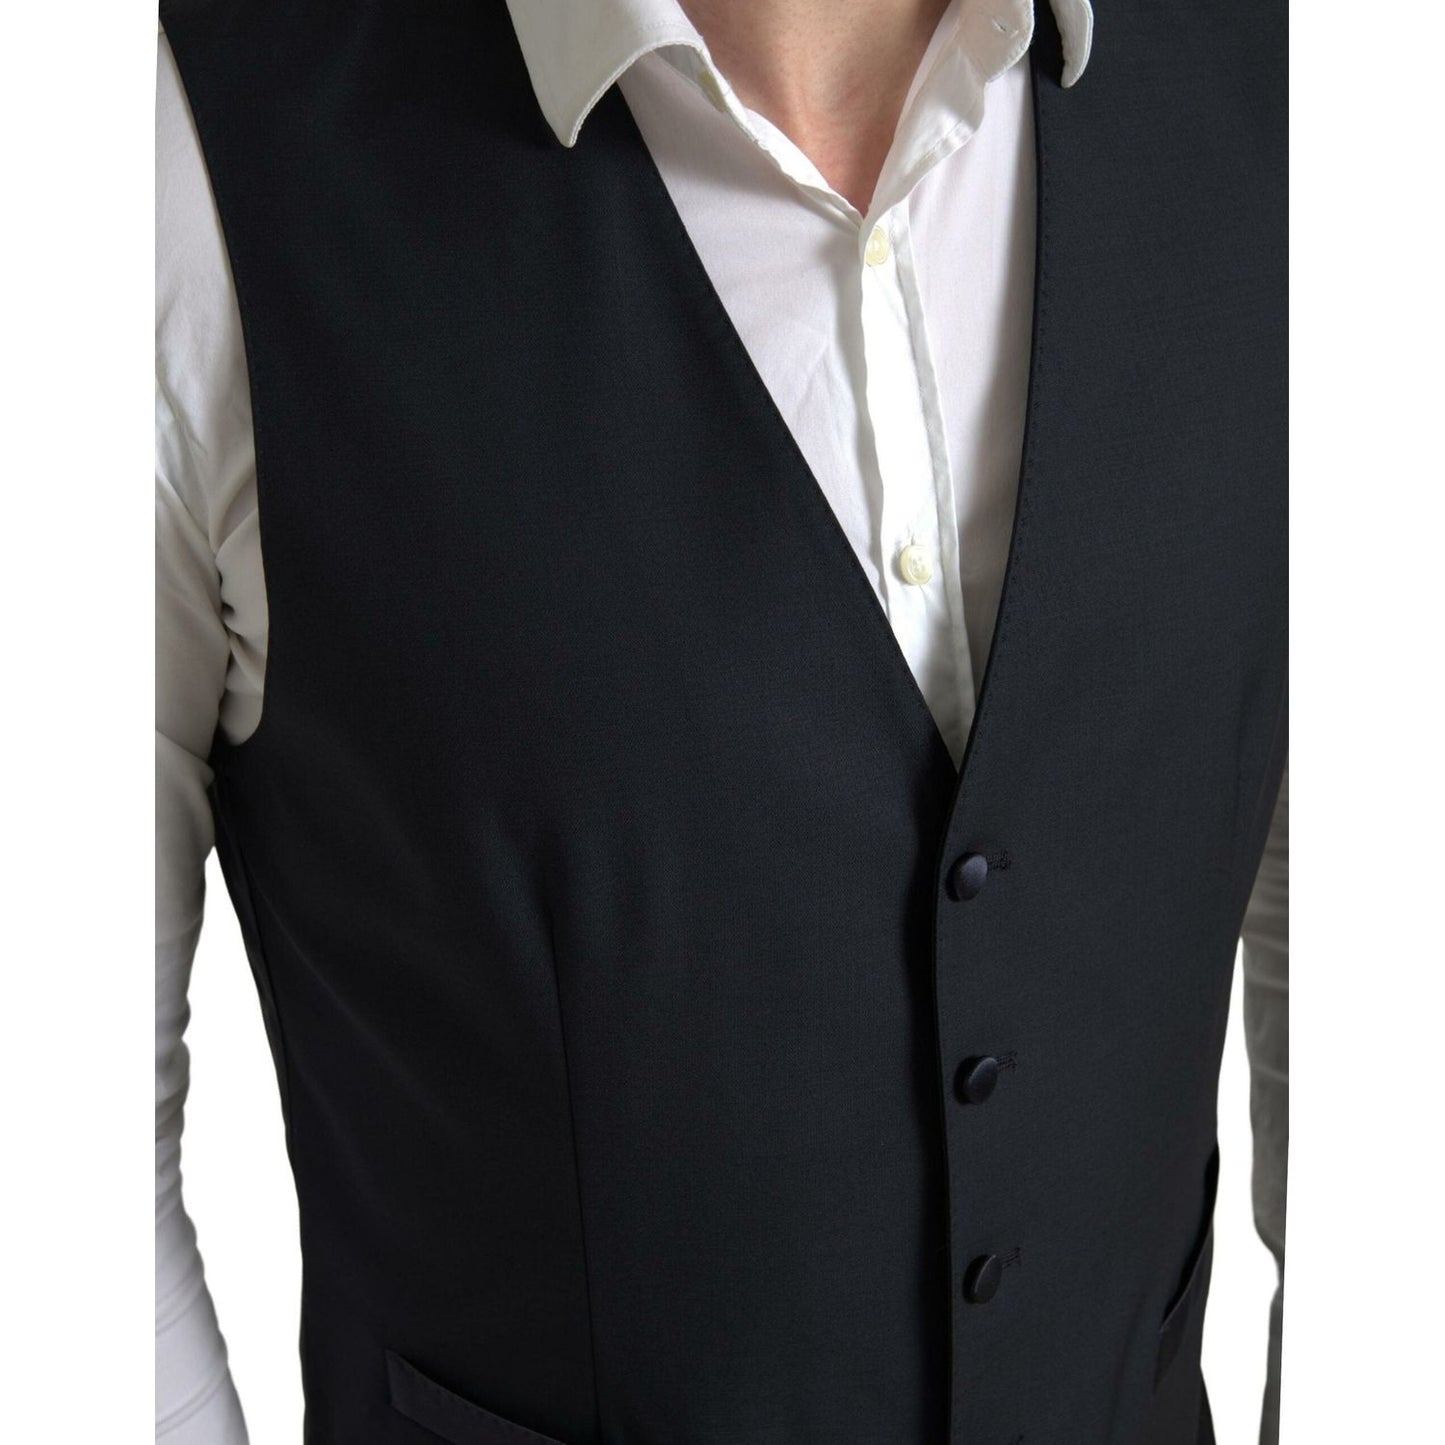 Dolce & Gabbana Elegant Slim Fit Two-Piece Martini Suit blue-2-piece-single-breasted-martini-suit-2